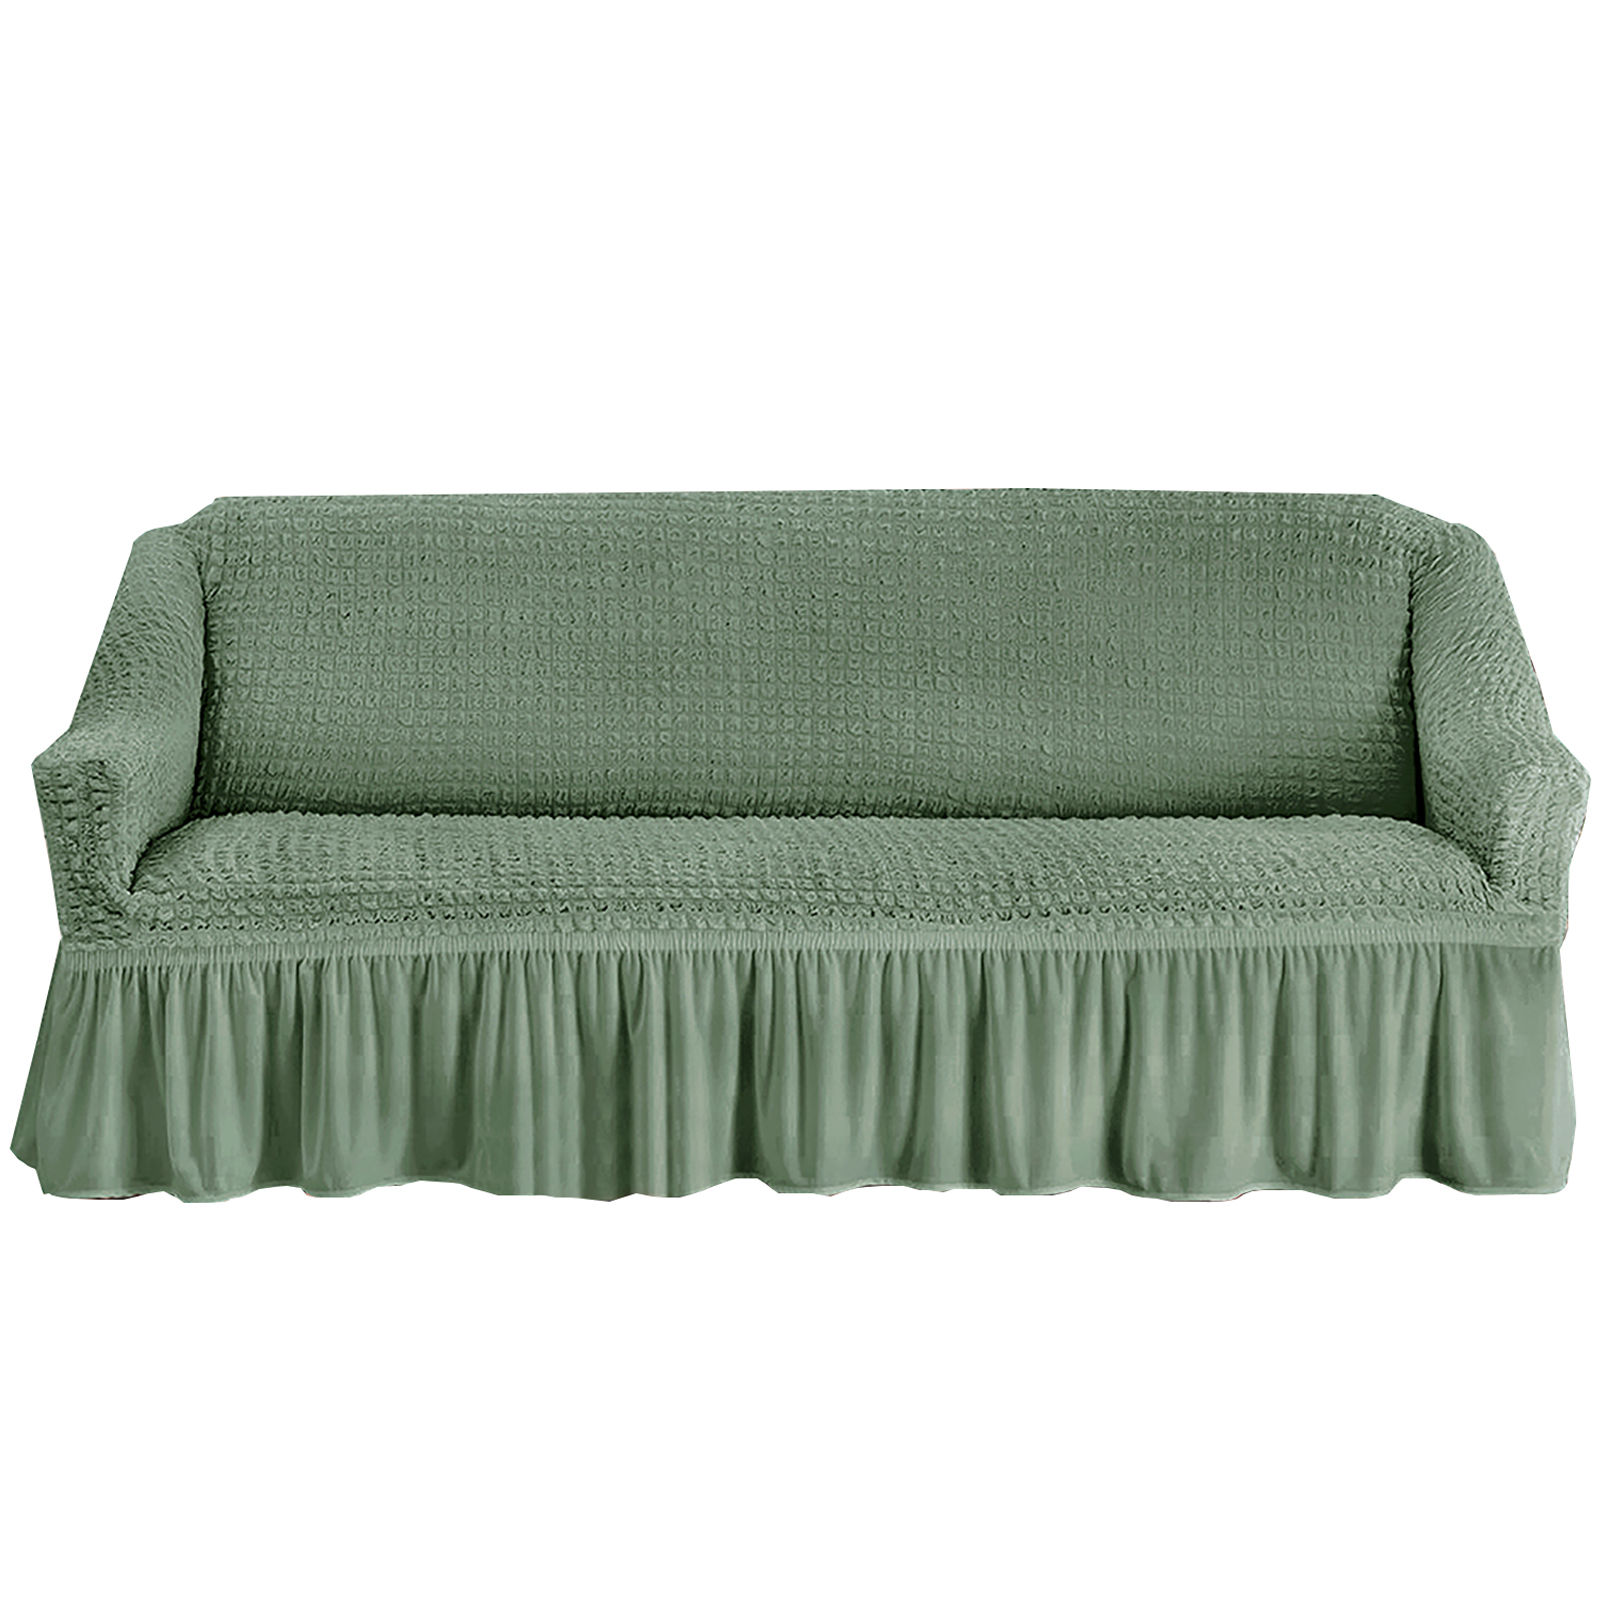 Stretch Sofa Slipcover, 3 Seater Sofa Slipcovers With Skirt With Armless Soft Sofa Cover Elastic Straps Sofa Slipcover For Living Room Kids Pets-Green B-Large